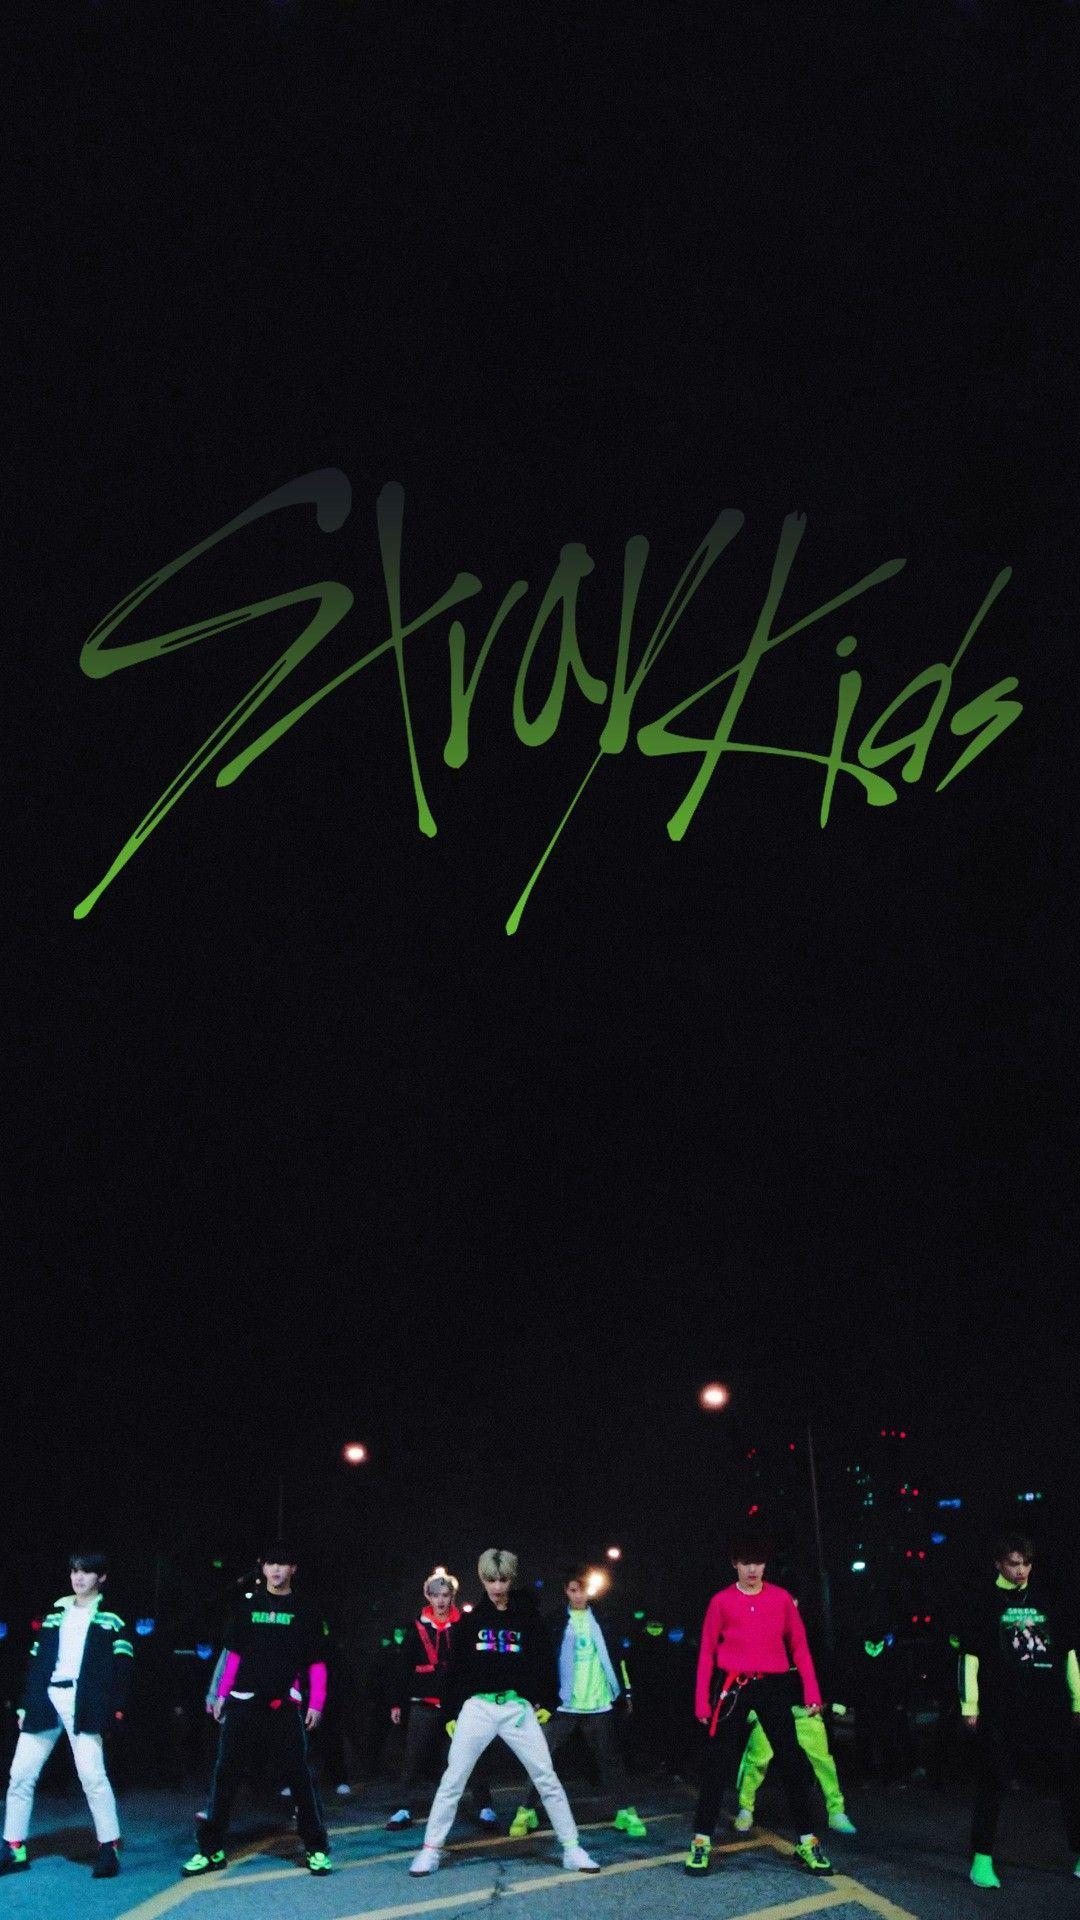 Stray Kids Wallpapers Top Free Stray Kids Backgrounds